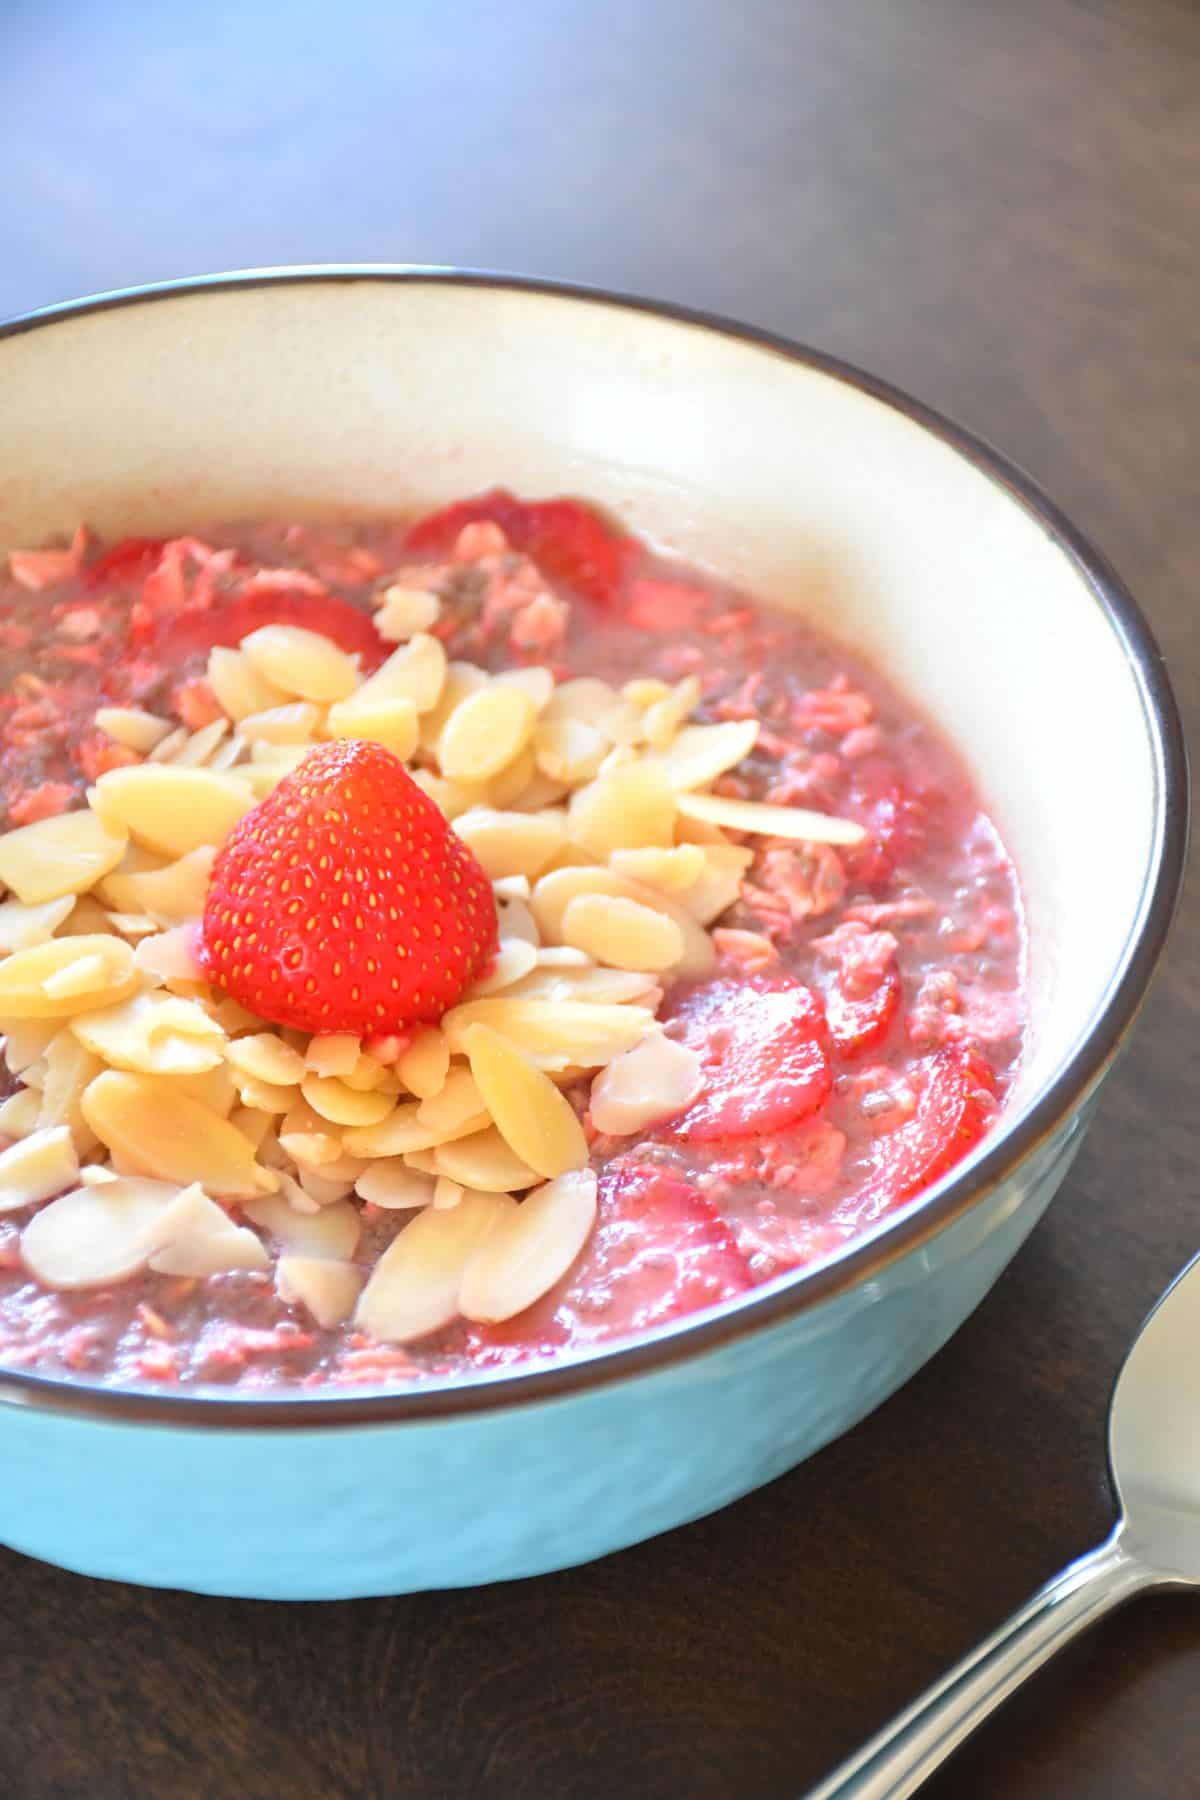 A delicious double strawberry overnight oatmeal in a blue ceramic bowl and a spoon on a wooden table.